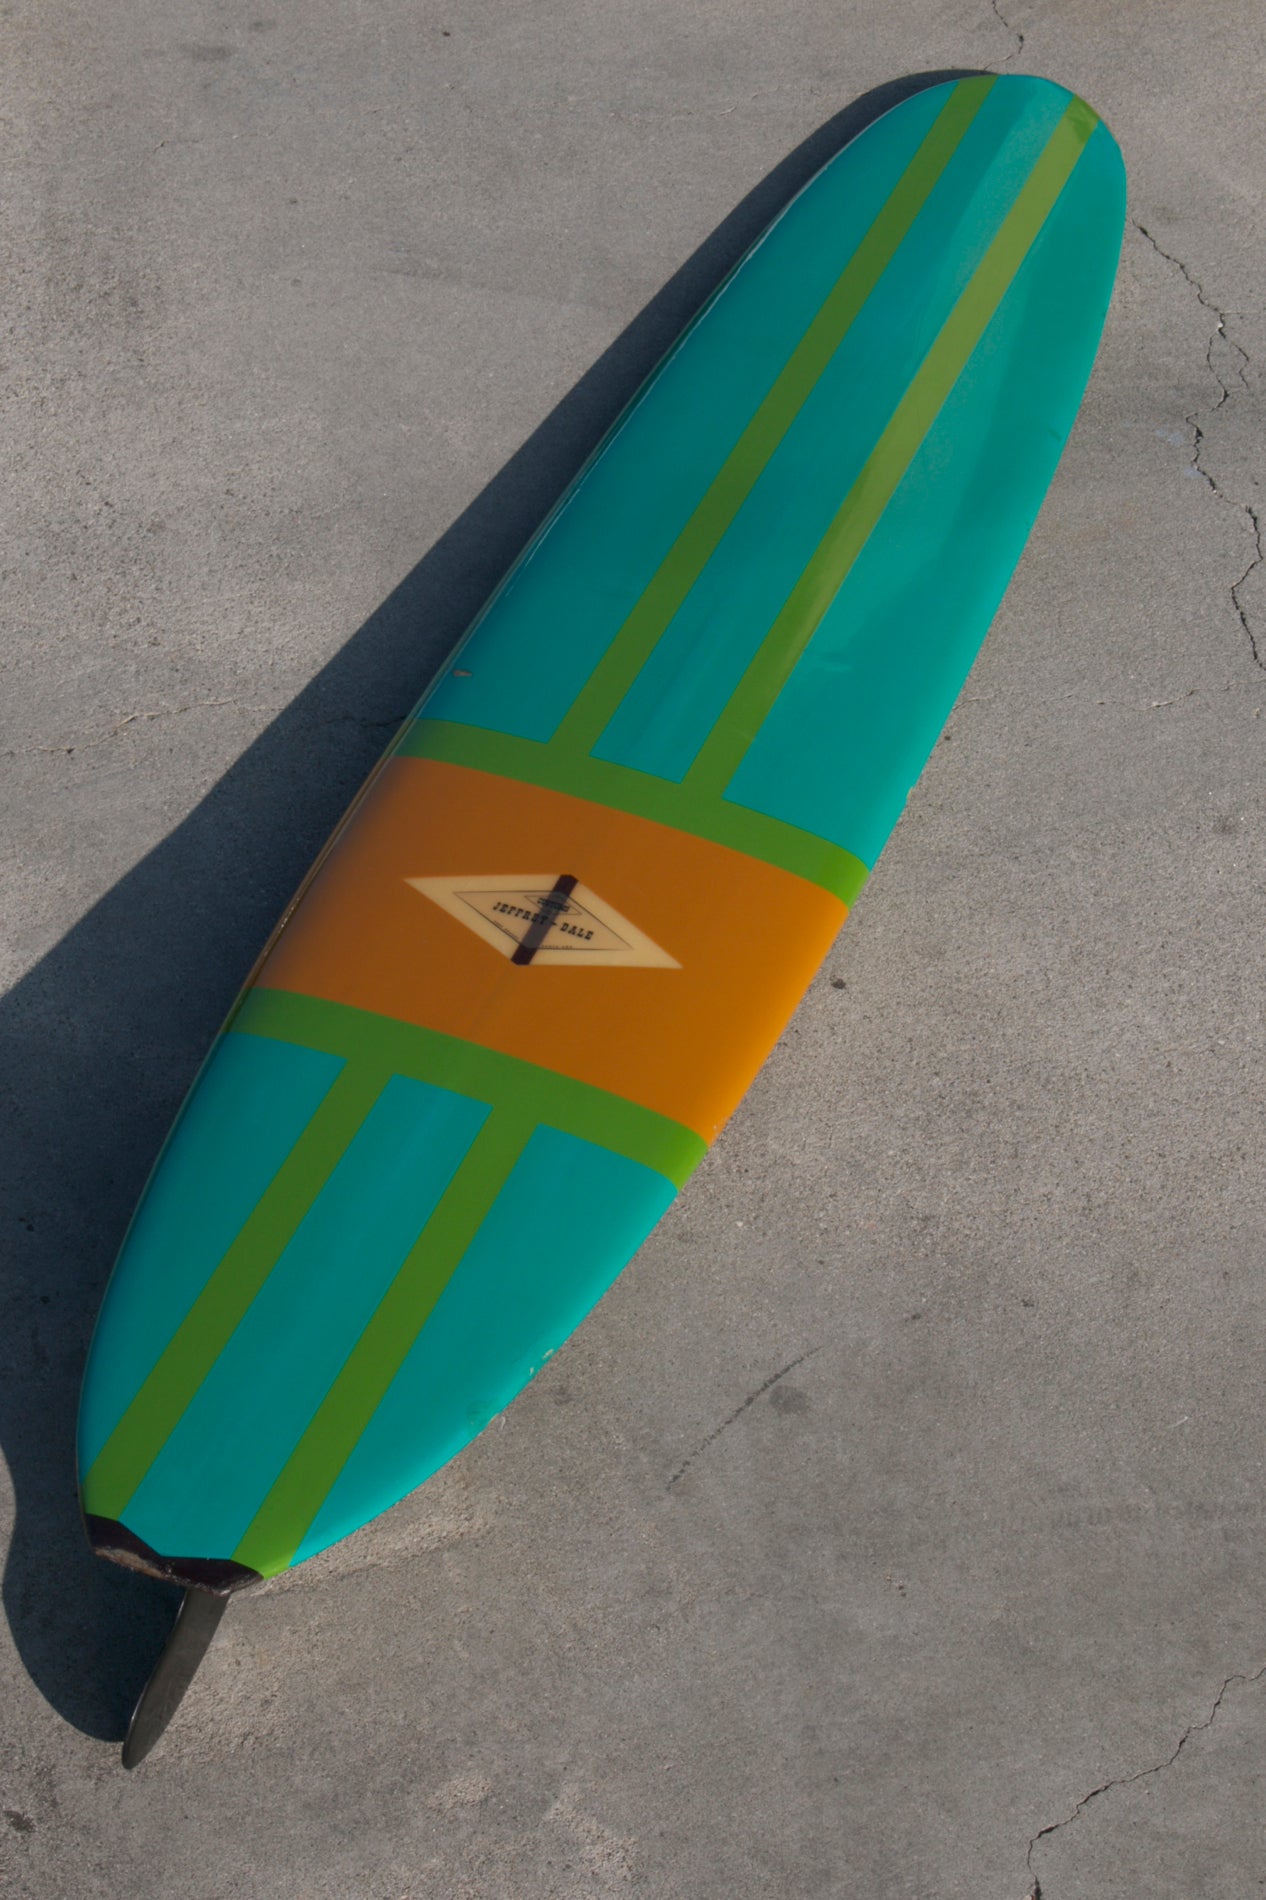 This stunning 1960s surfboard has an older restoration featuring shades reminiscent of the fantastic Porsche colors of the 1960's.  Eye catching yet subtle stripes of pea green and sea foam blue are laid over a pumpkin orange center.  The clear logo